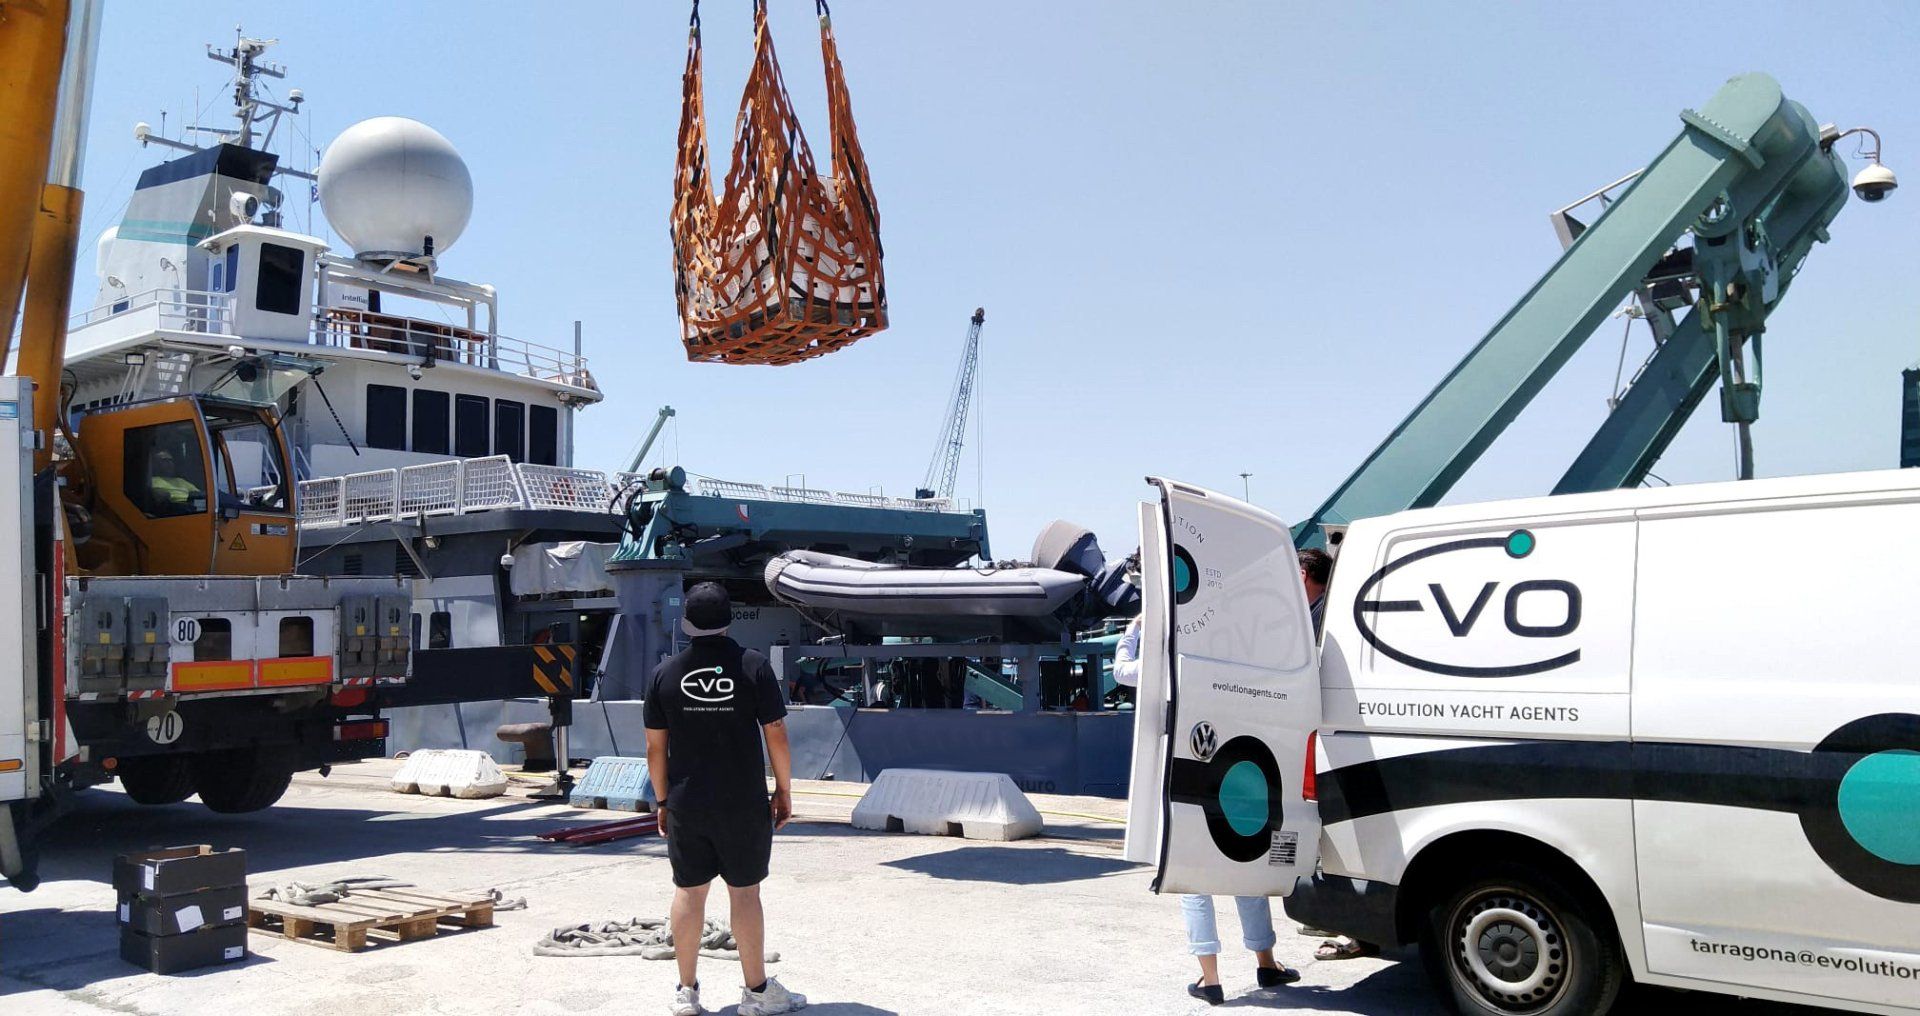 A provisioning delivery made by Evolution Yacht Agents